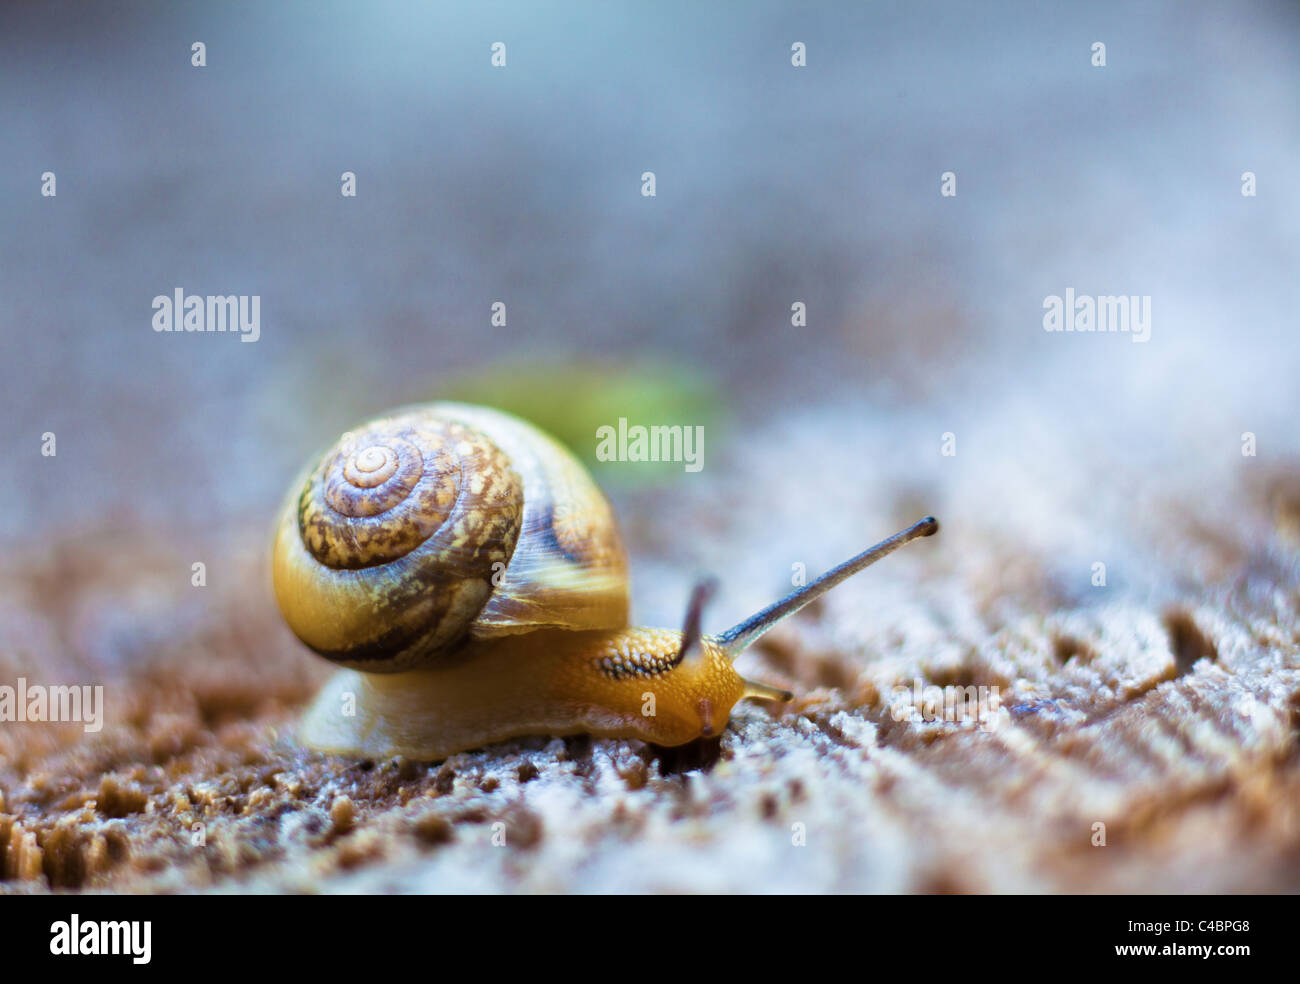 snail crawling on a wooden surface Stock Photo